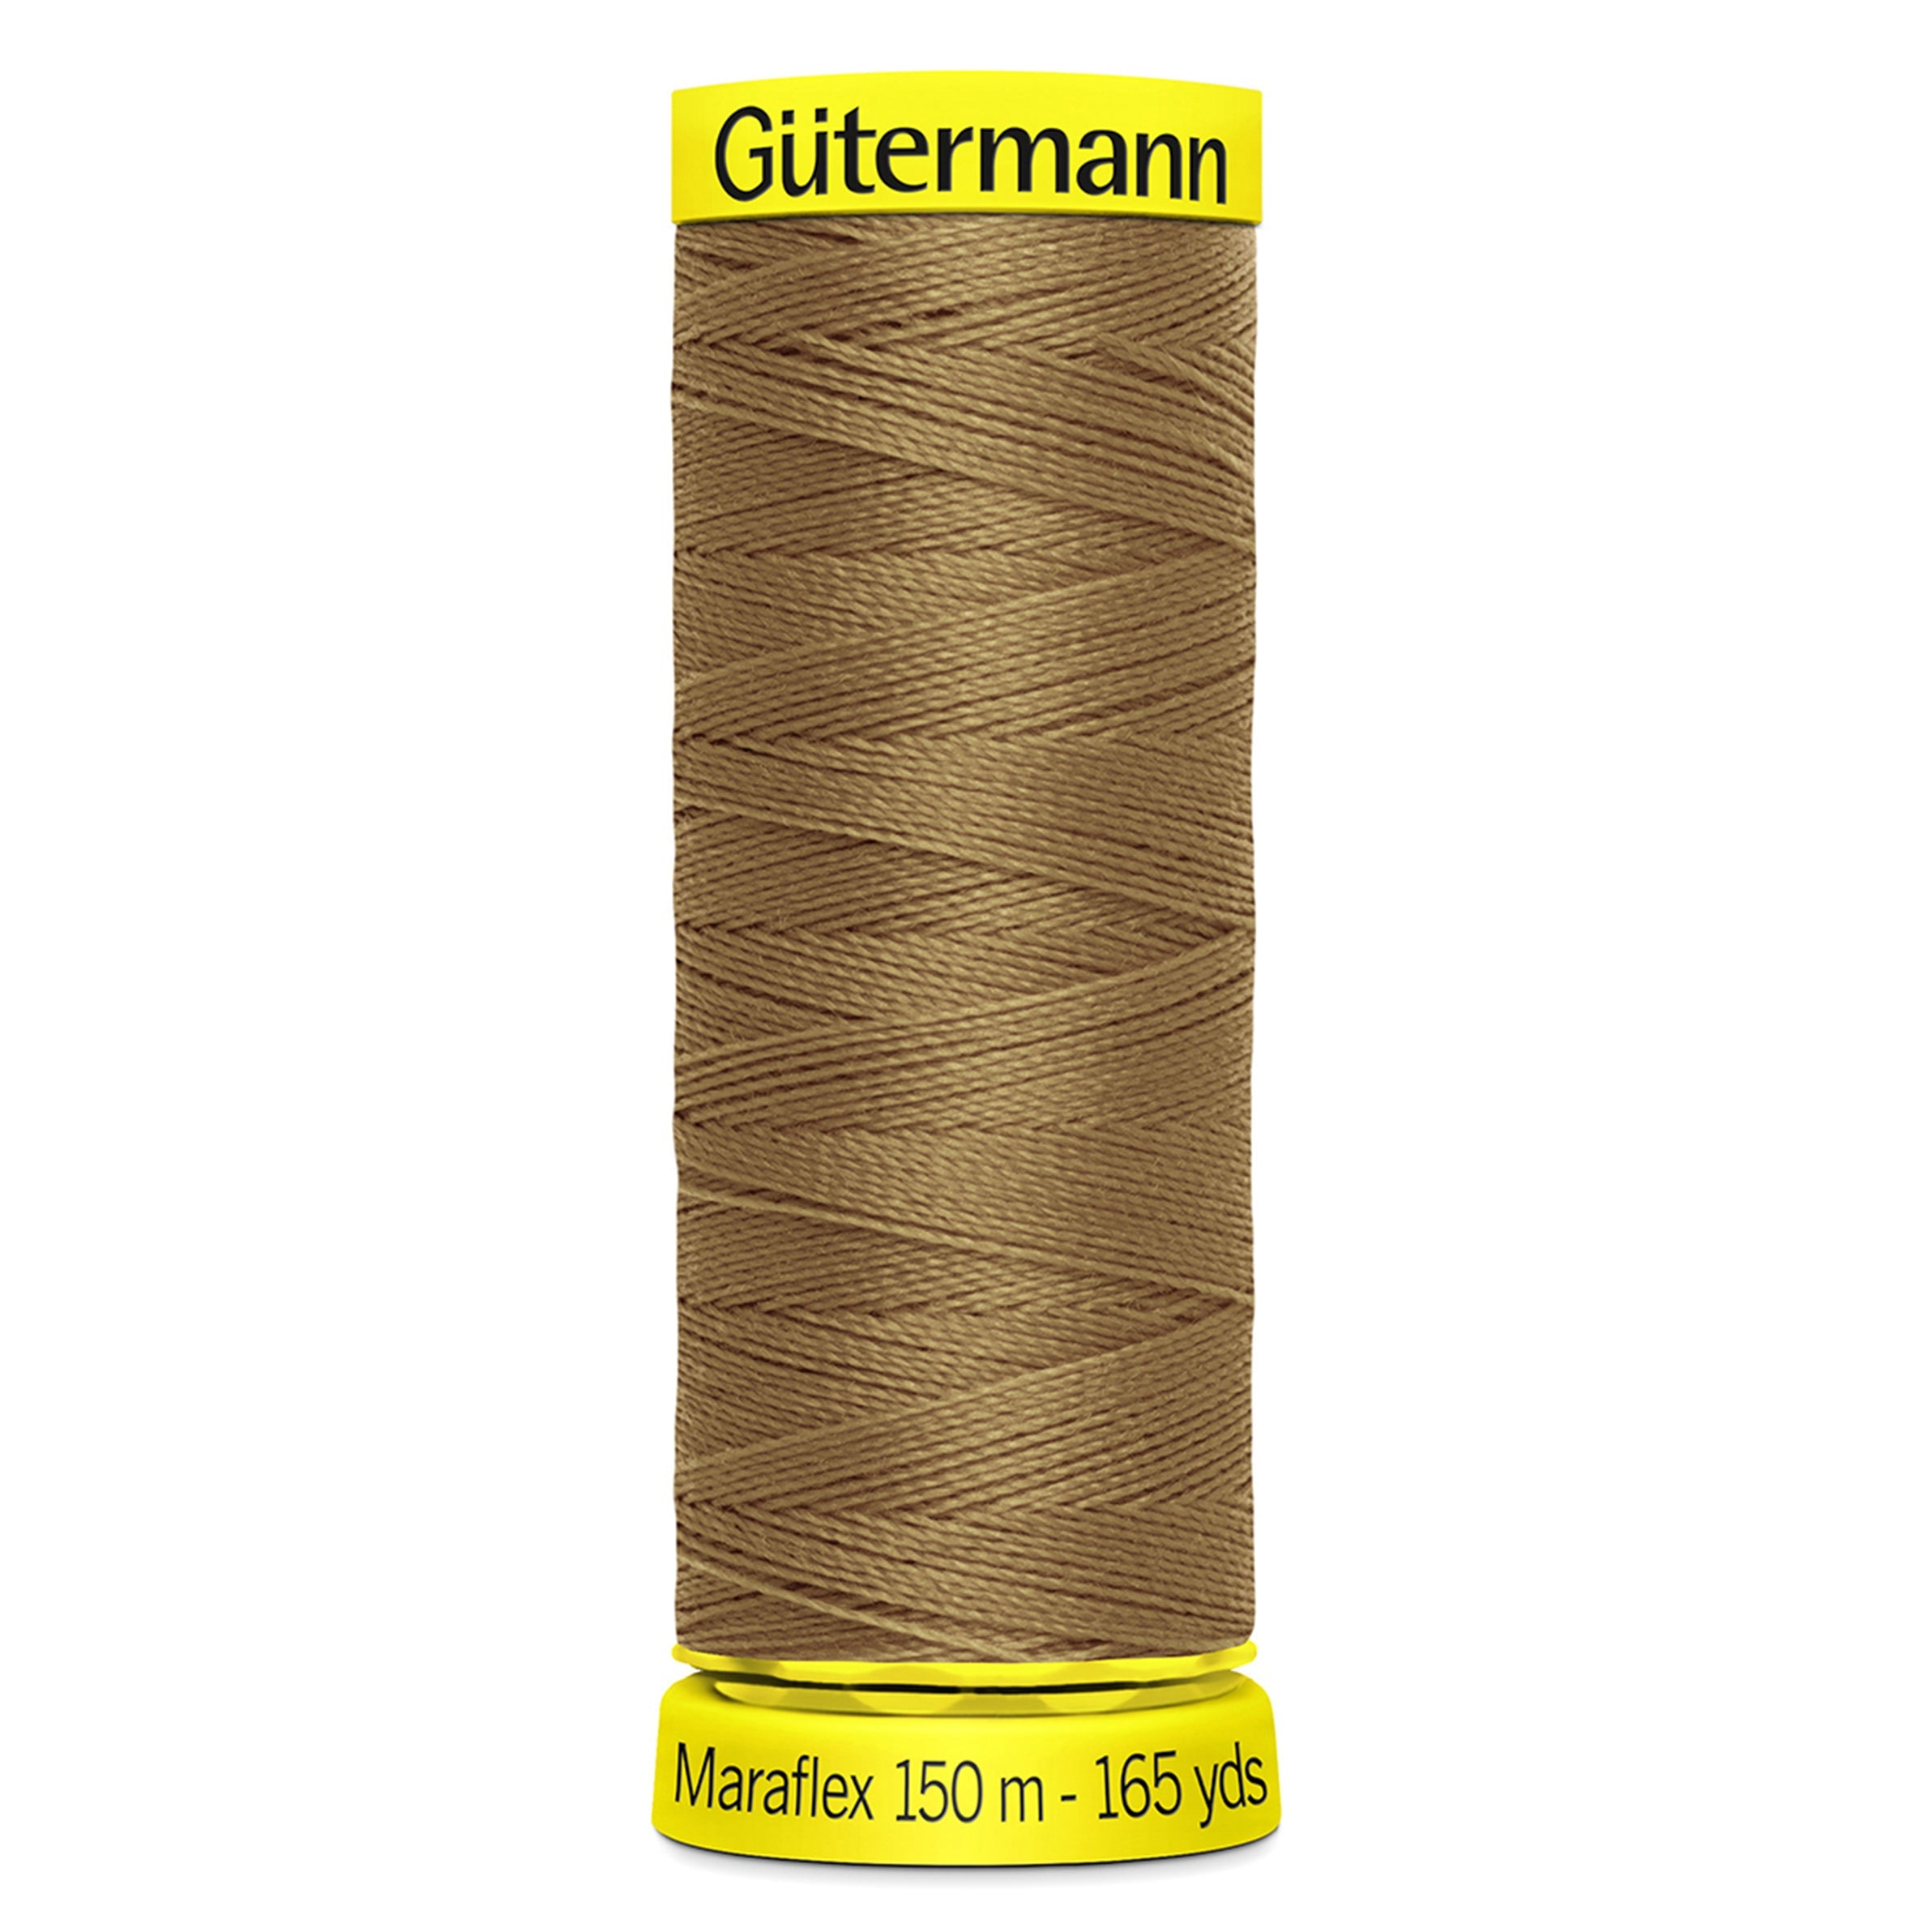 Gutermann Maraflex Stretchy Sewing Thread 150m colour 887 from Jaycotts Sewing Supplies